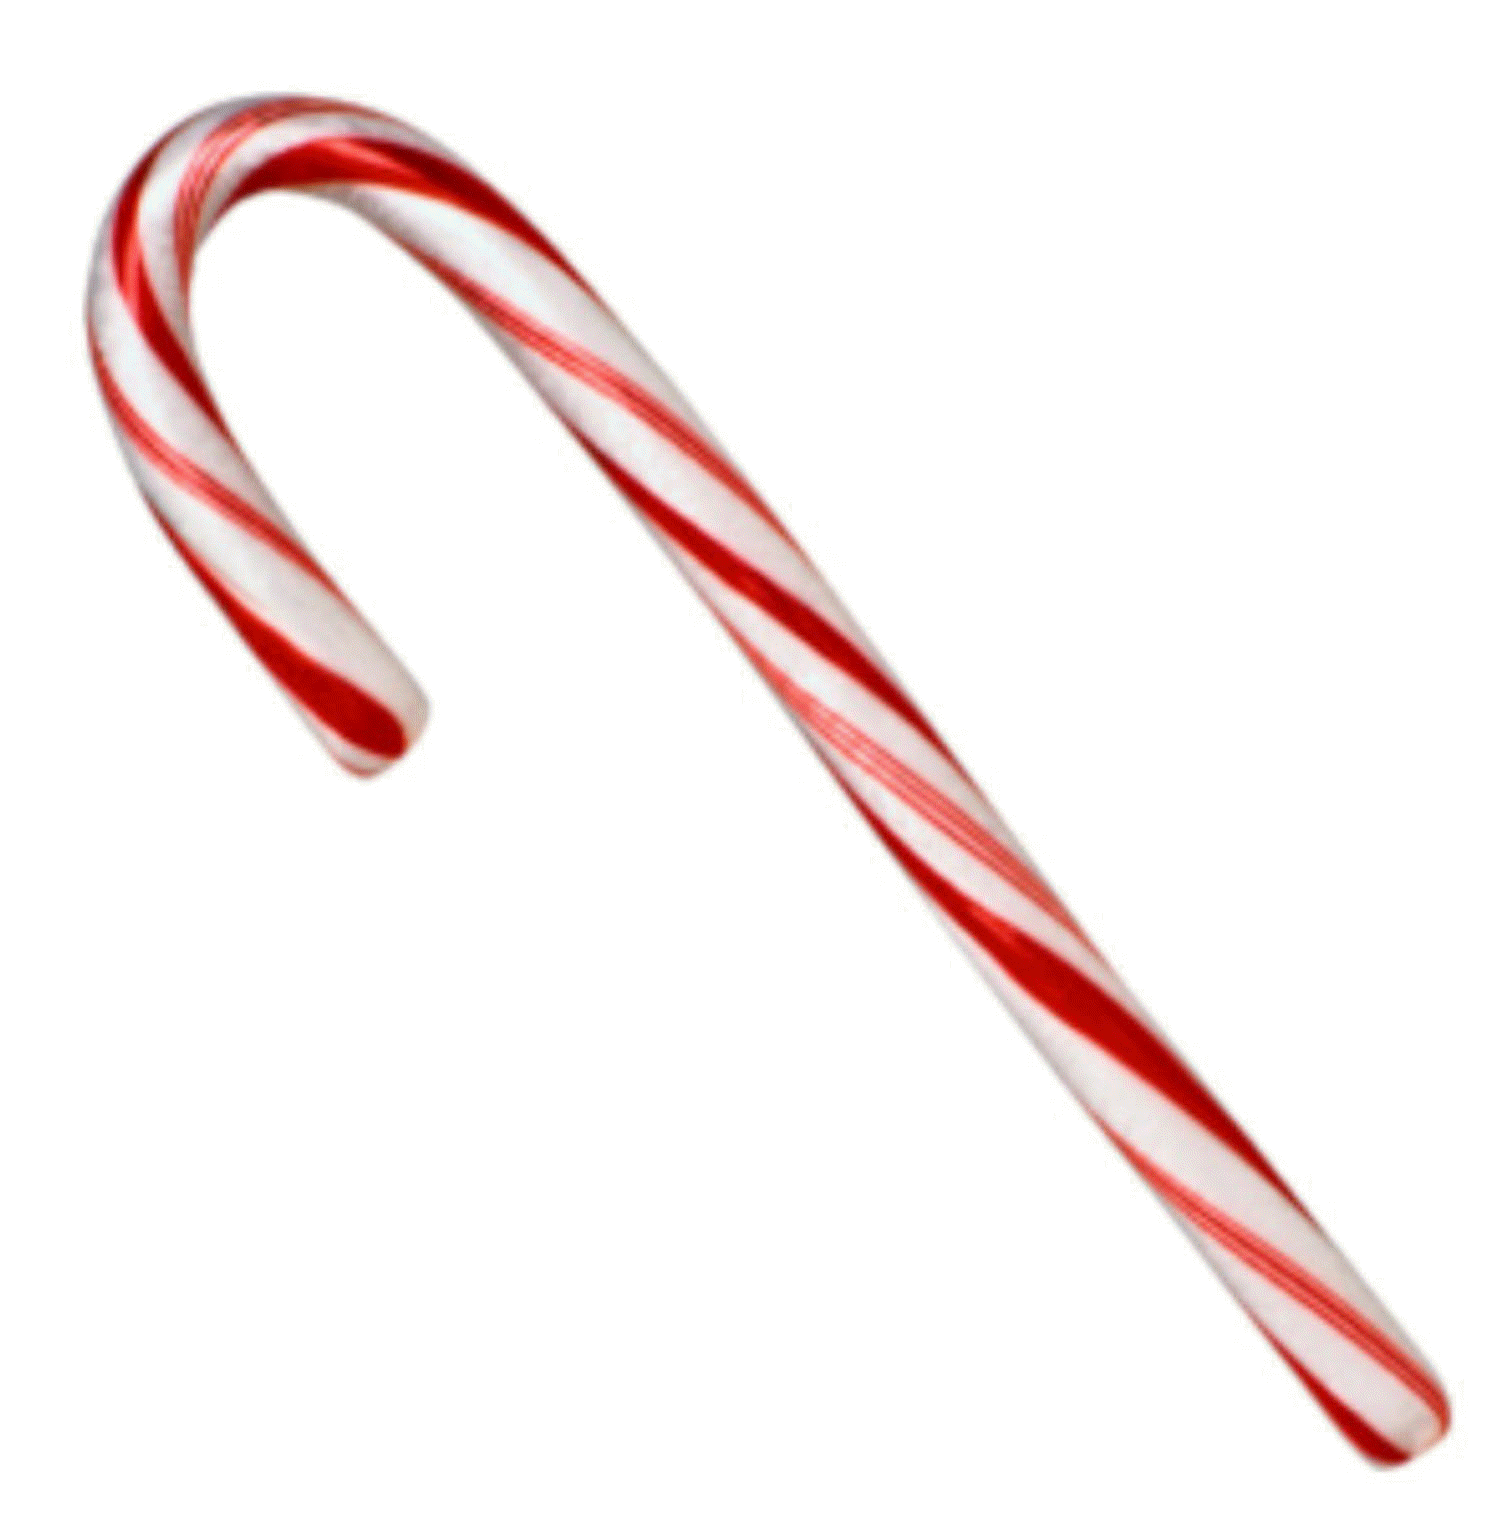 Candy Cane Candy Cane Flavor Wishlist Product Added View Wishlist The    